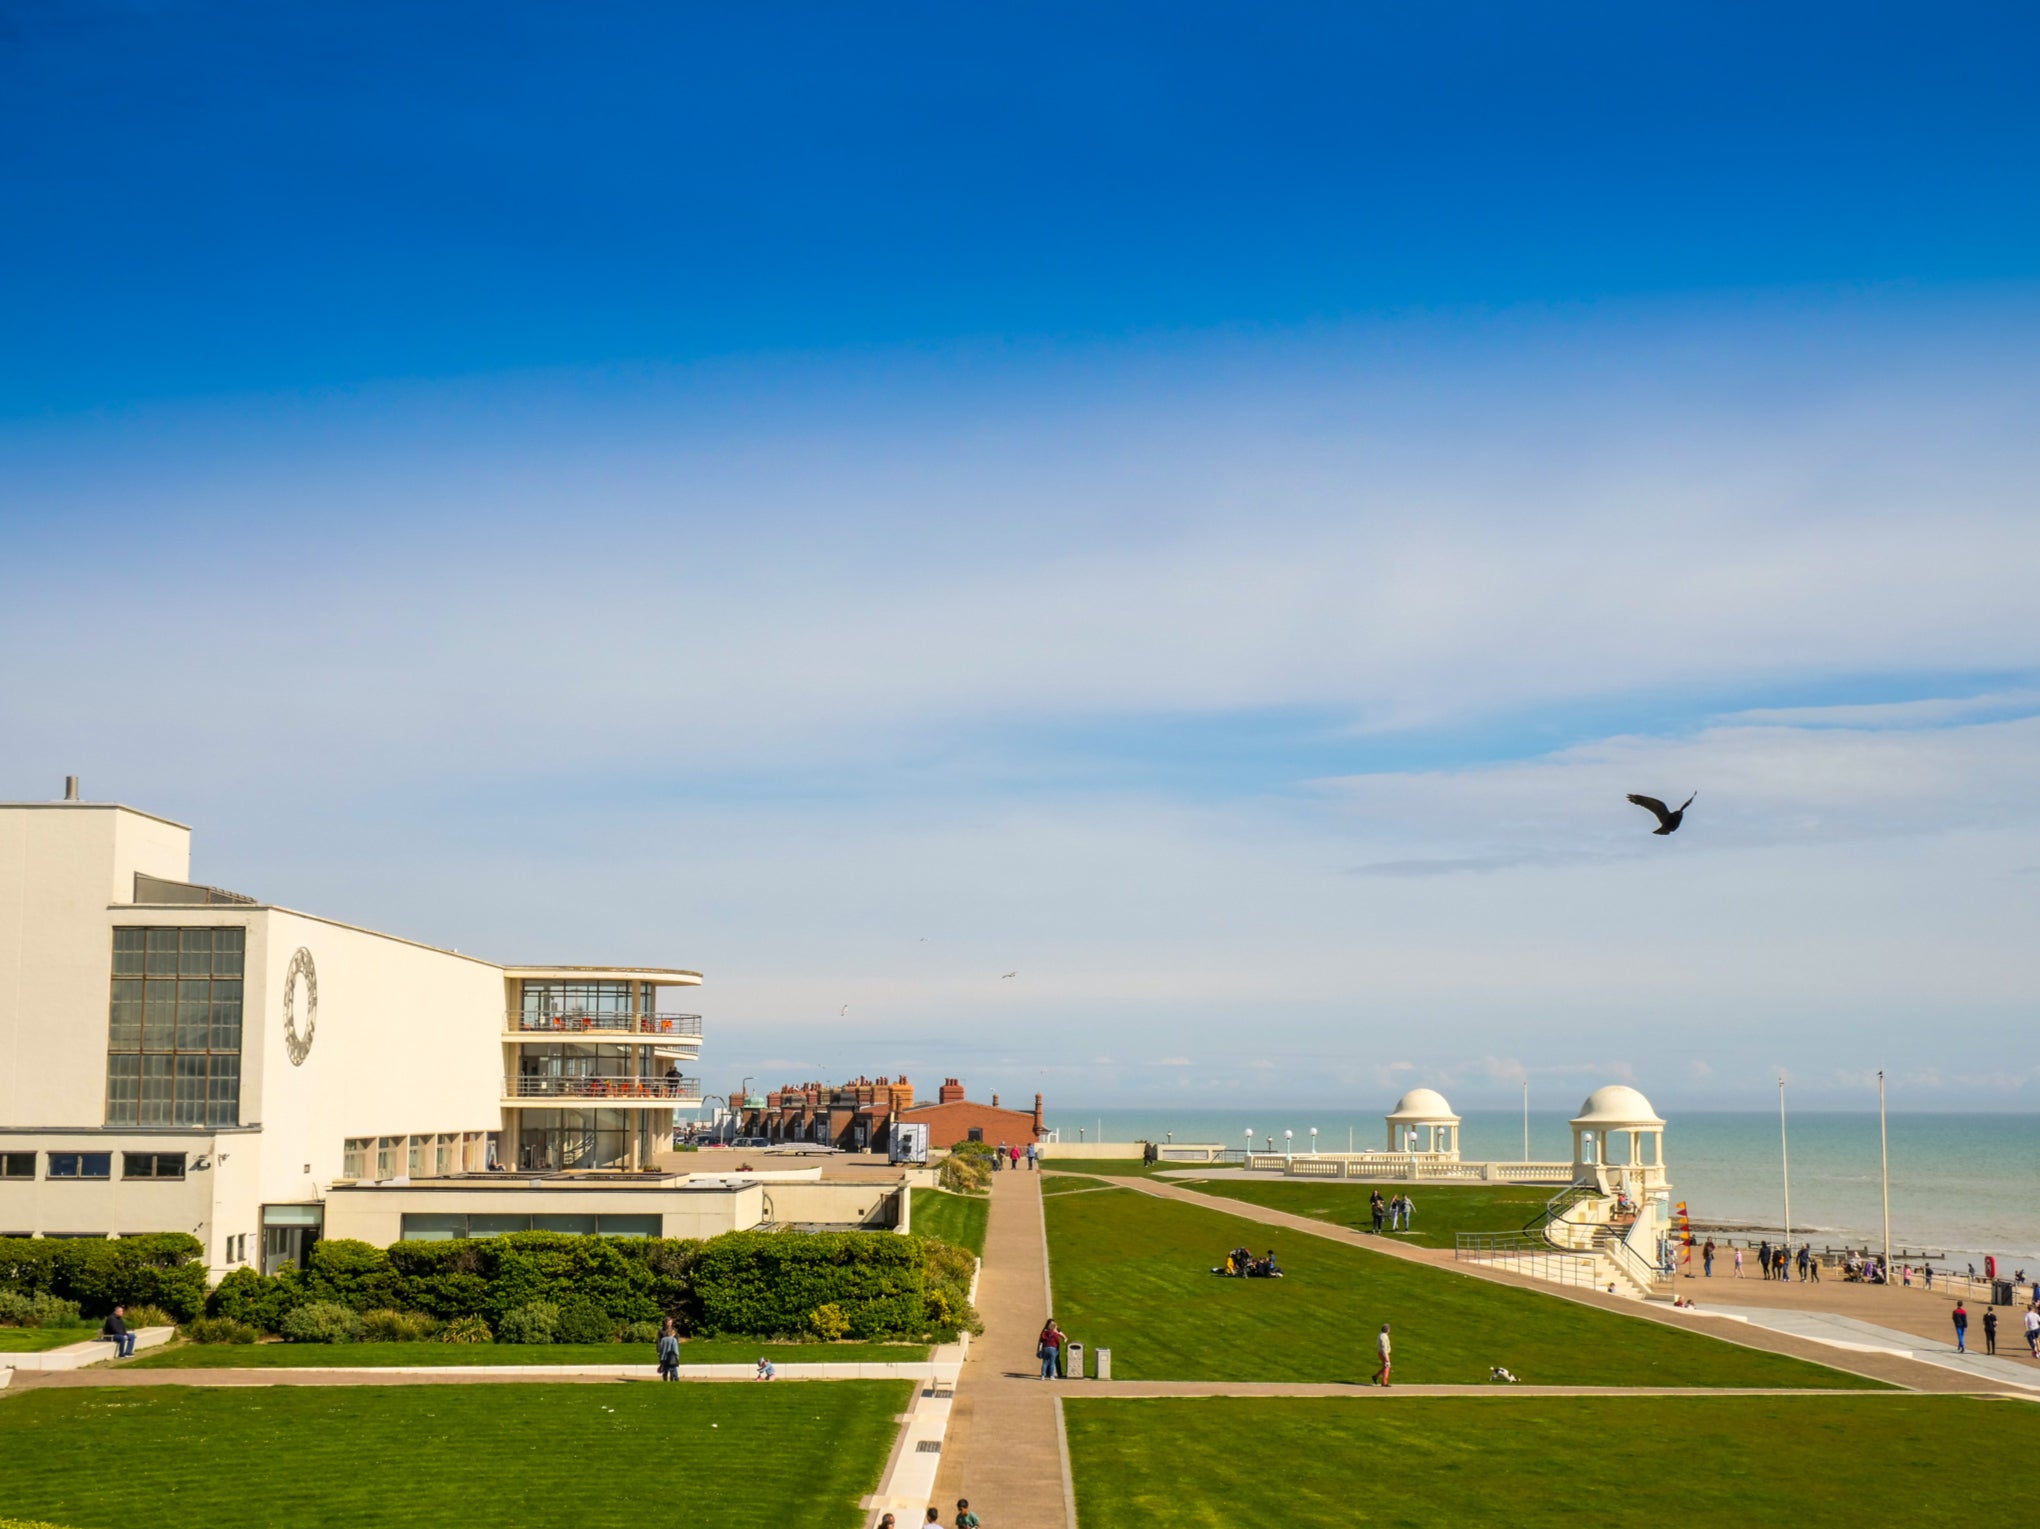 The modernist style of the De La Warr contrasts wonderfully with the natural beauty of the coastline